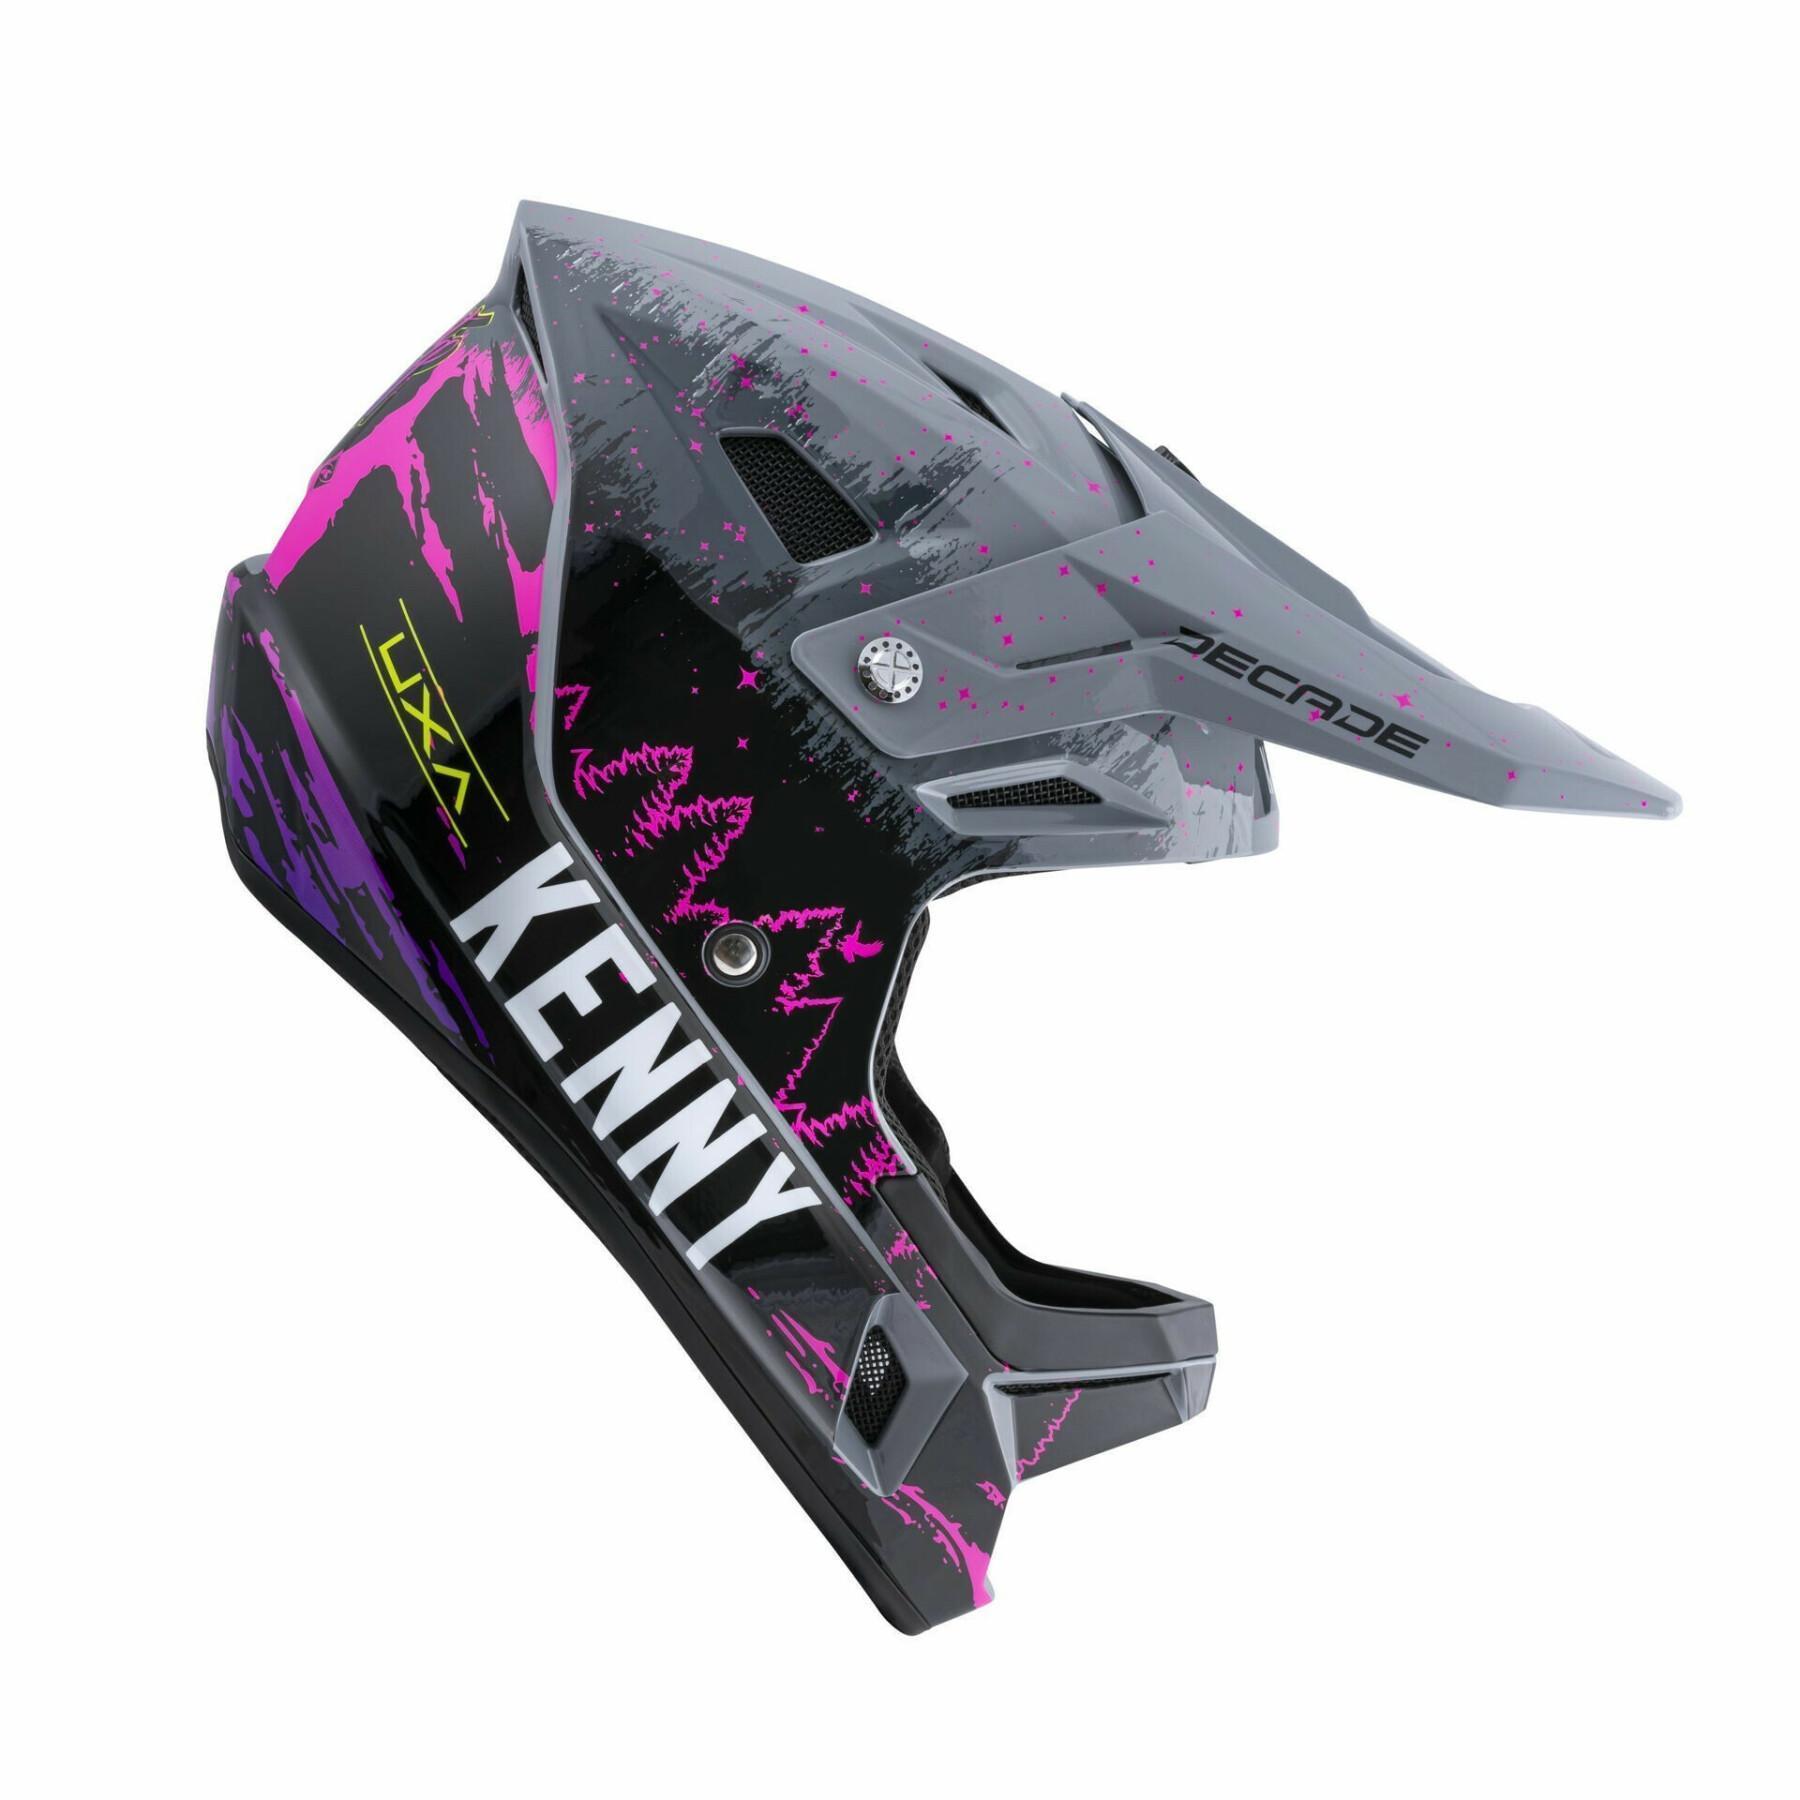 Helm Kenny Decade Graphic